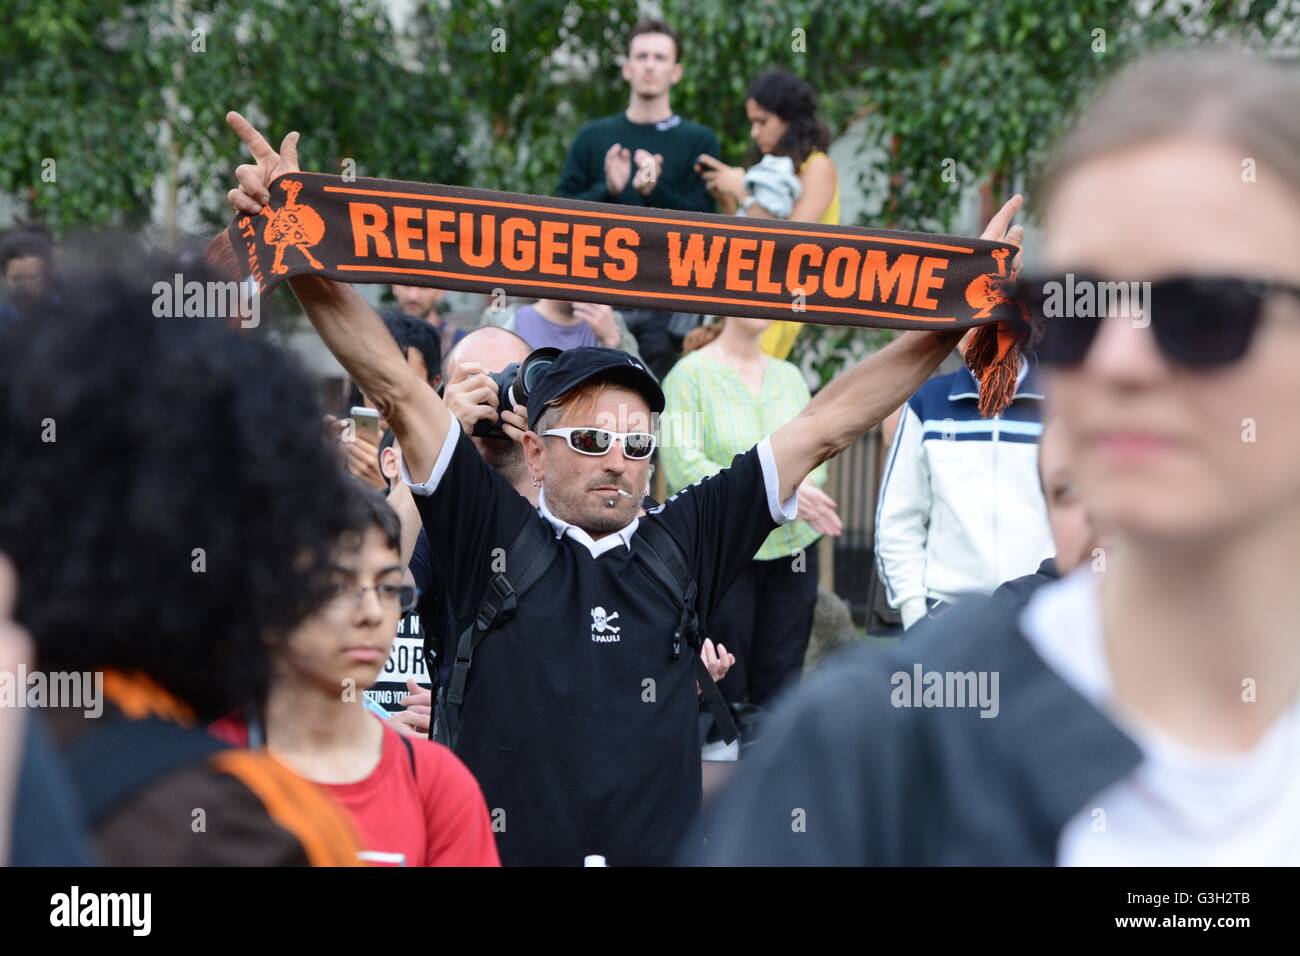 London, UK. 24 June, 2016. Pro-europe and migrant rally held in London.  Refugees welcome scarf held aloft at the demo. Credit:  Marc Ward/Alamy Live News Stock Photo